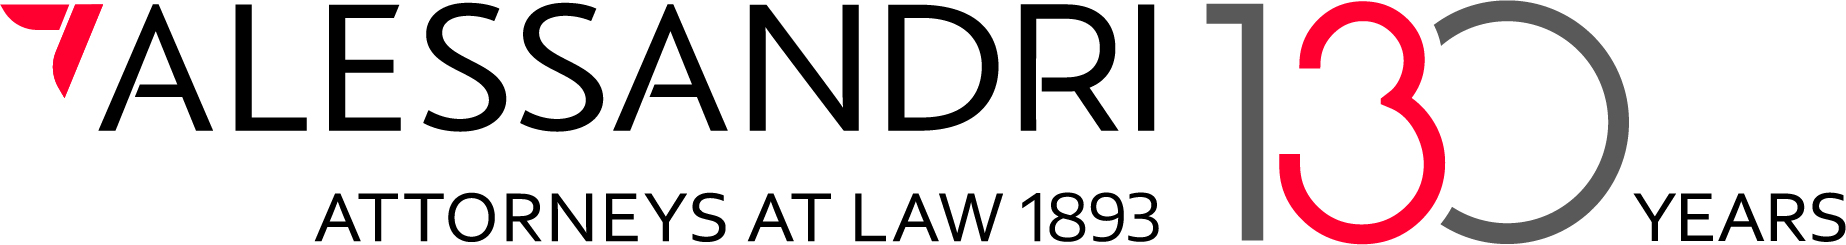 Logo of Alessandri, an IP law firm based in Chile